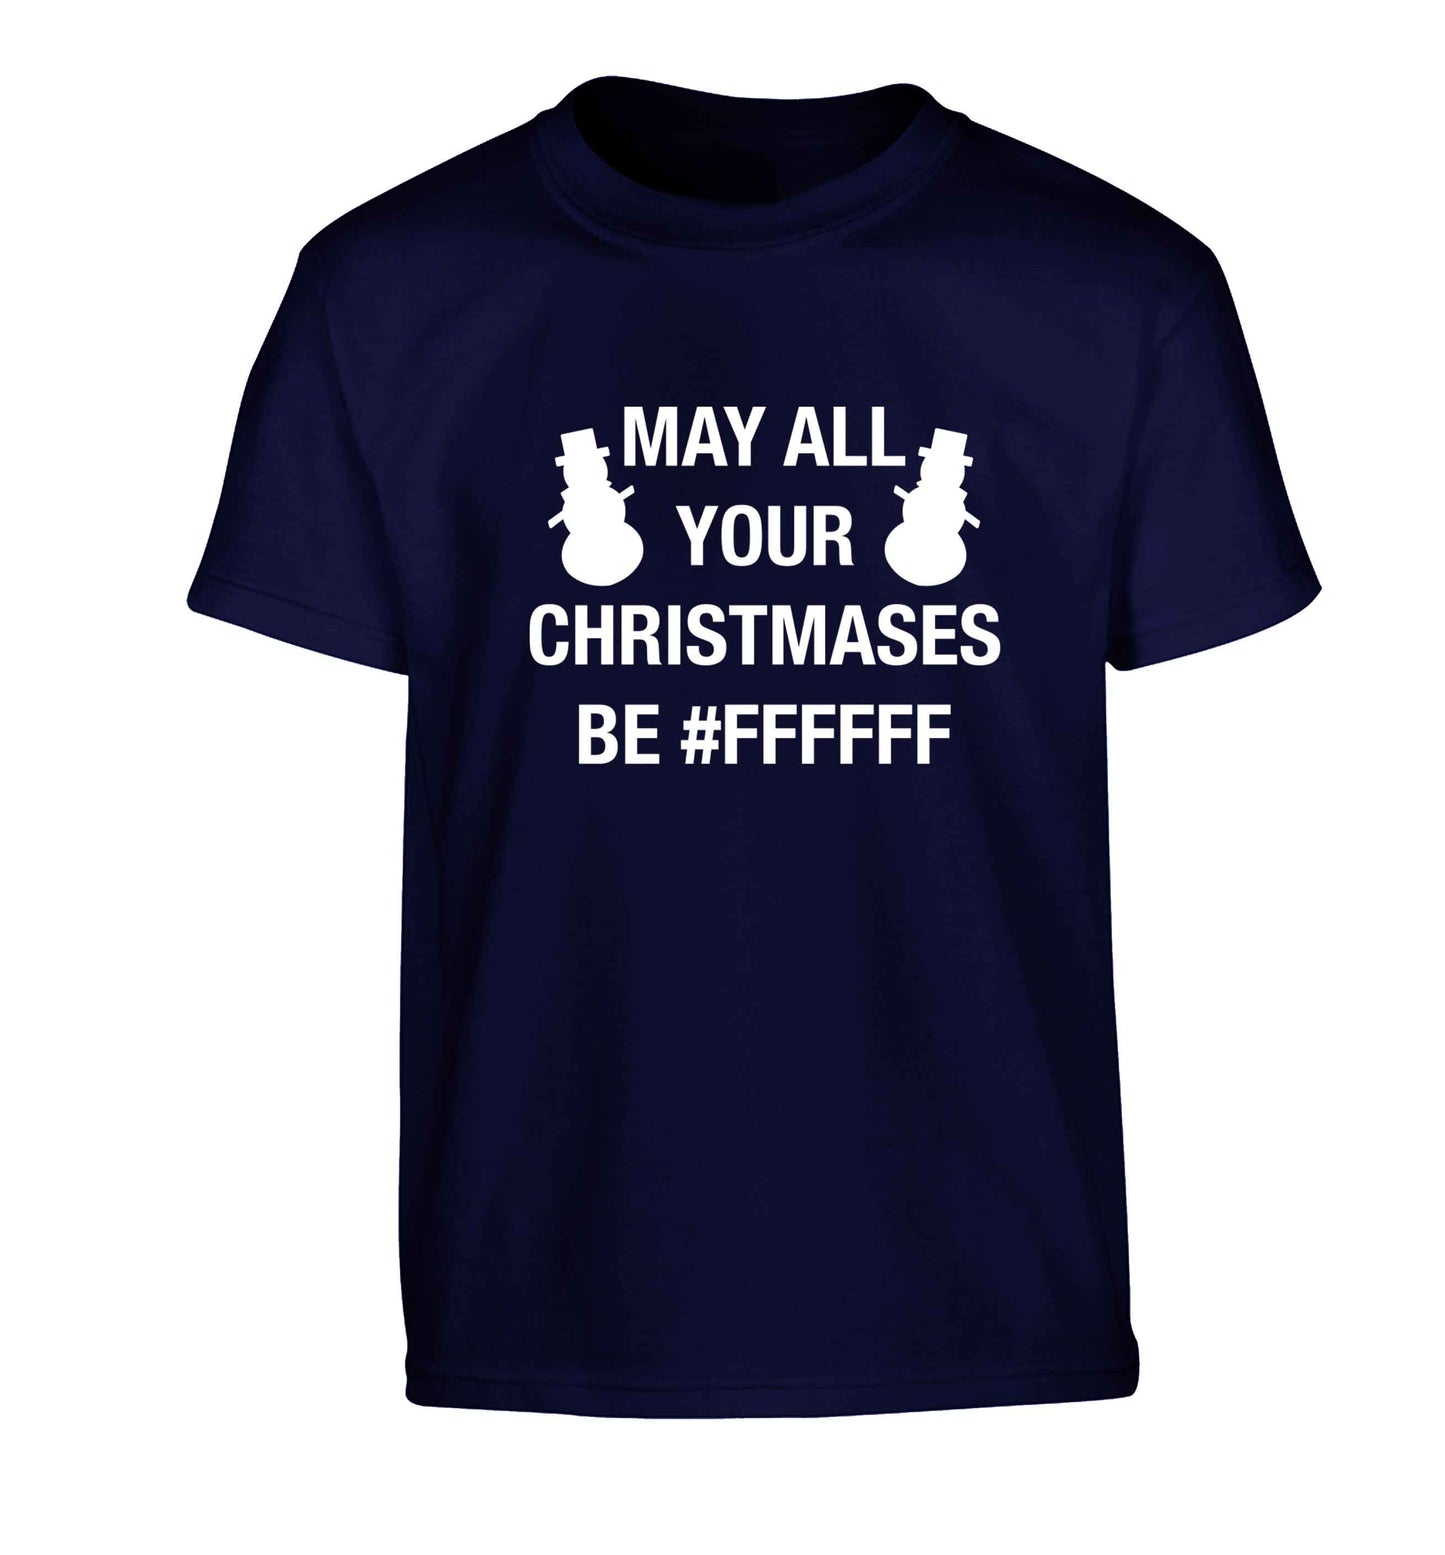 May all your Christmases be #FFFFFF Children's navy Tshirt 12-13 Years